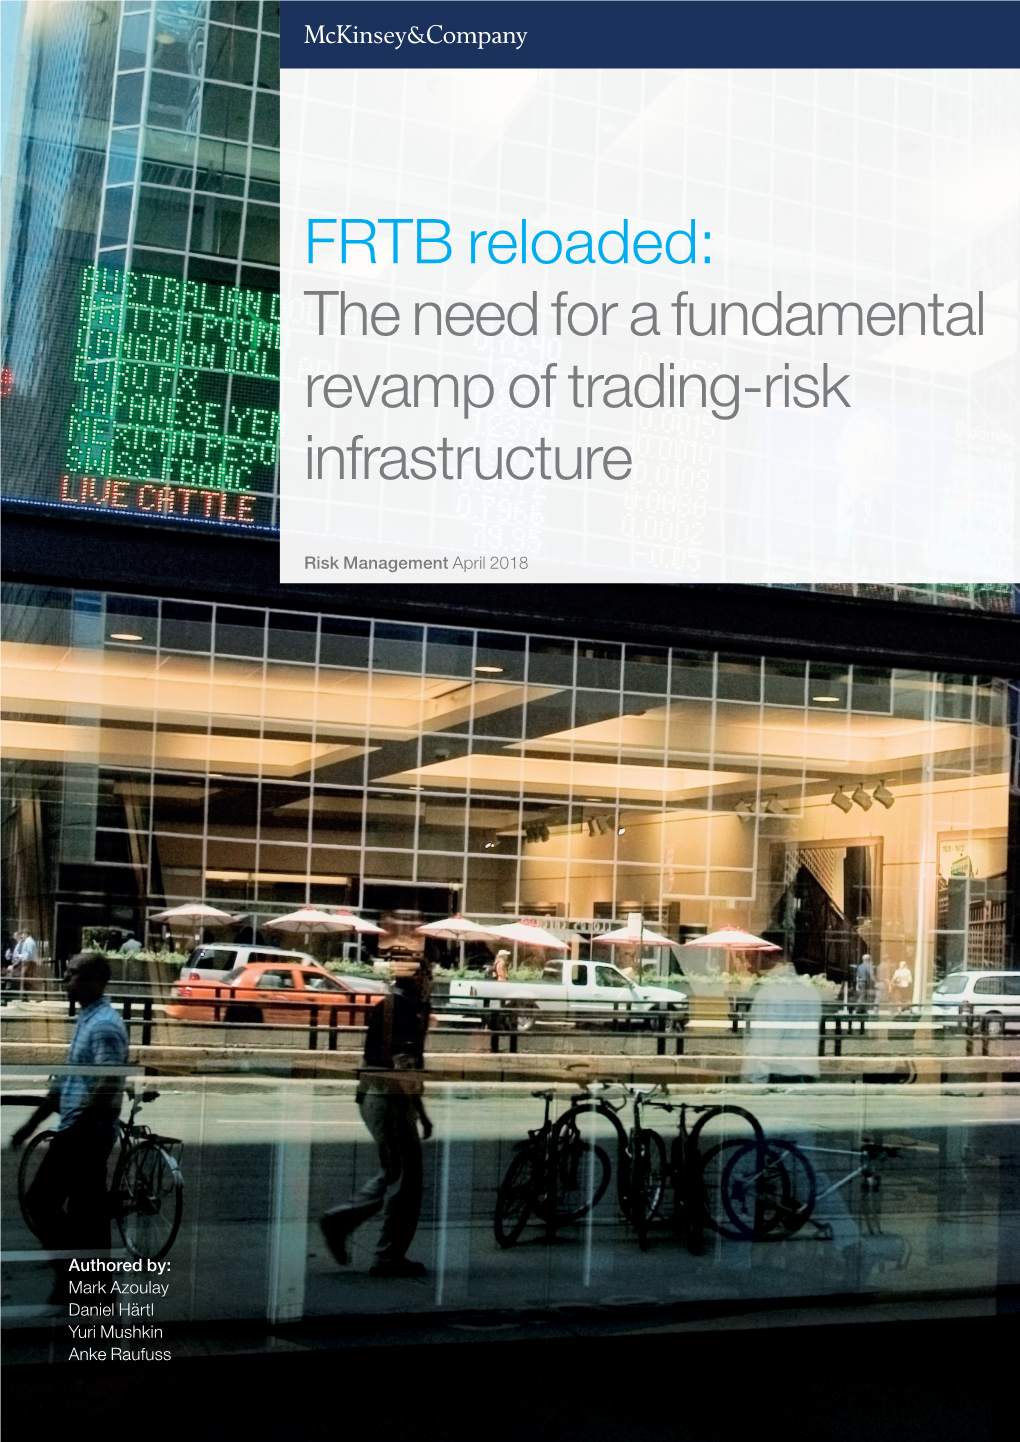 FRTB Reloaded: the Need for a Fundamental Revamp of Trading-Risk Infrastructure